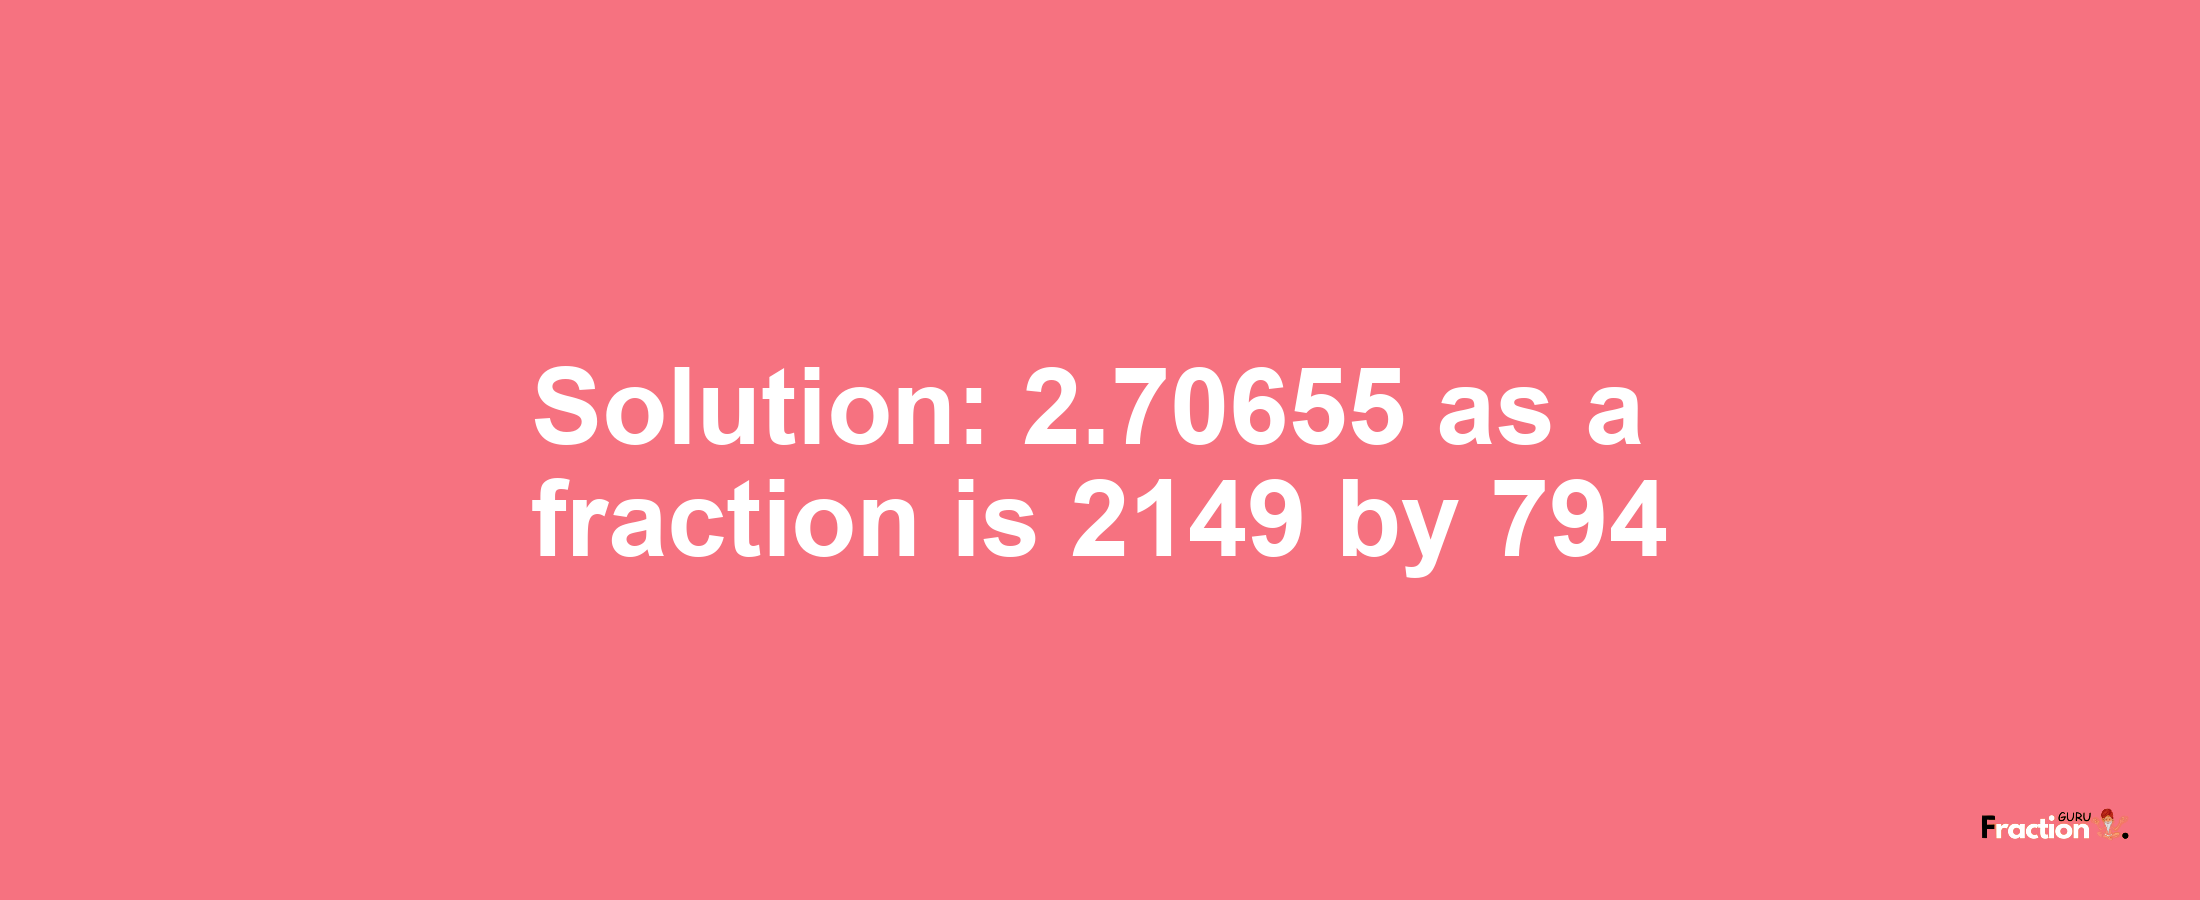 Solution:2.70655 as a fraction is 2149/794